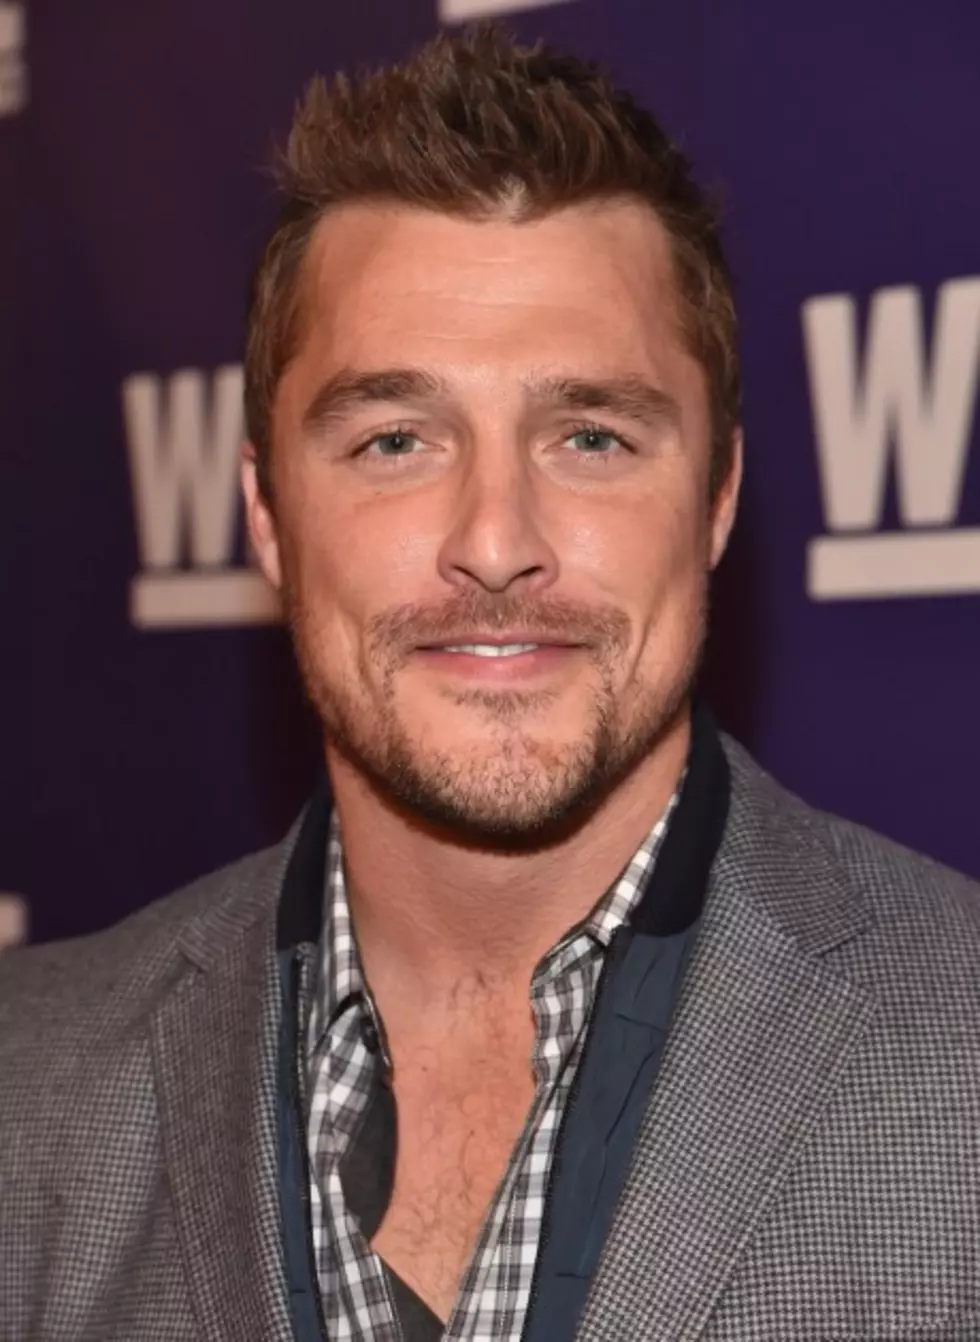 Meet Chris Soules from The Bachelor and DWTS!